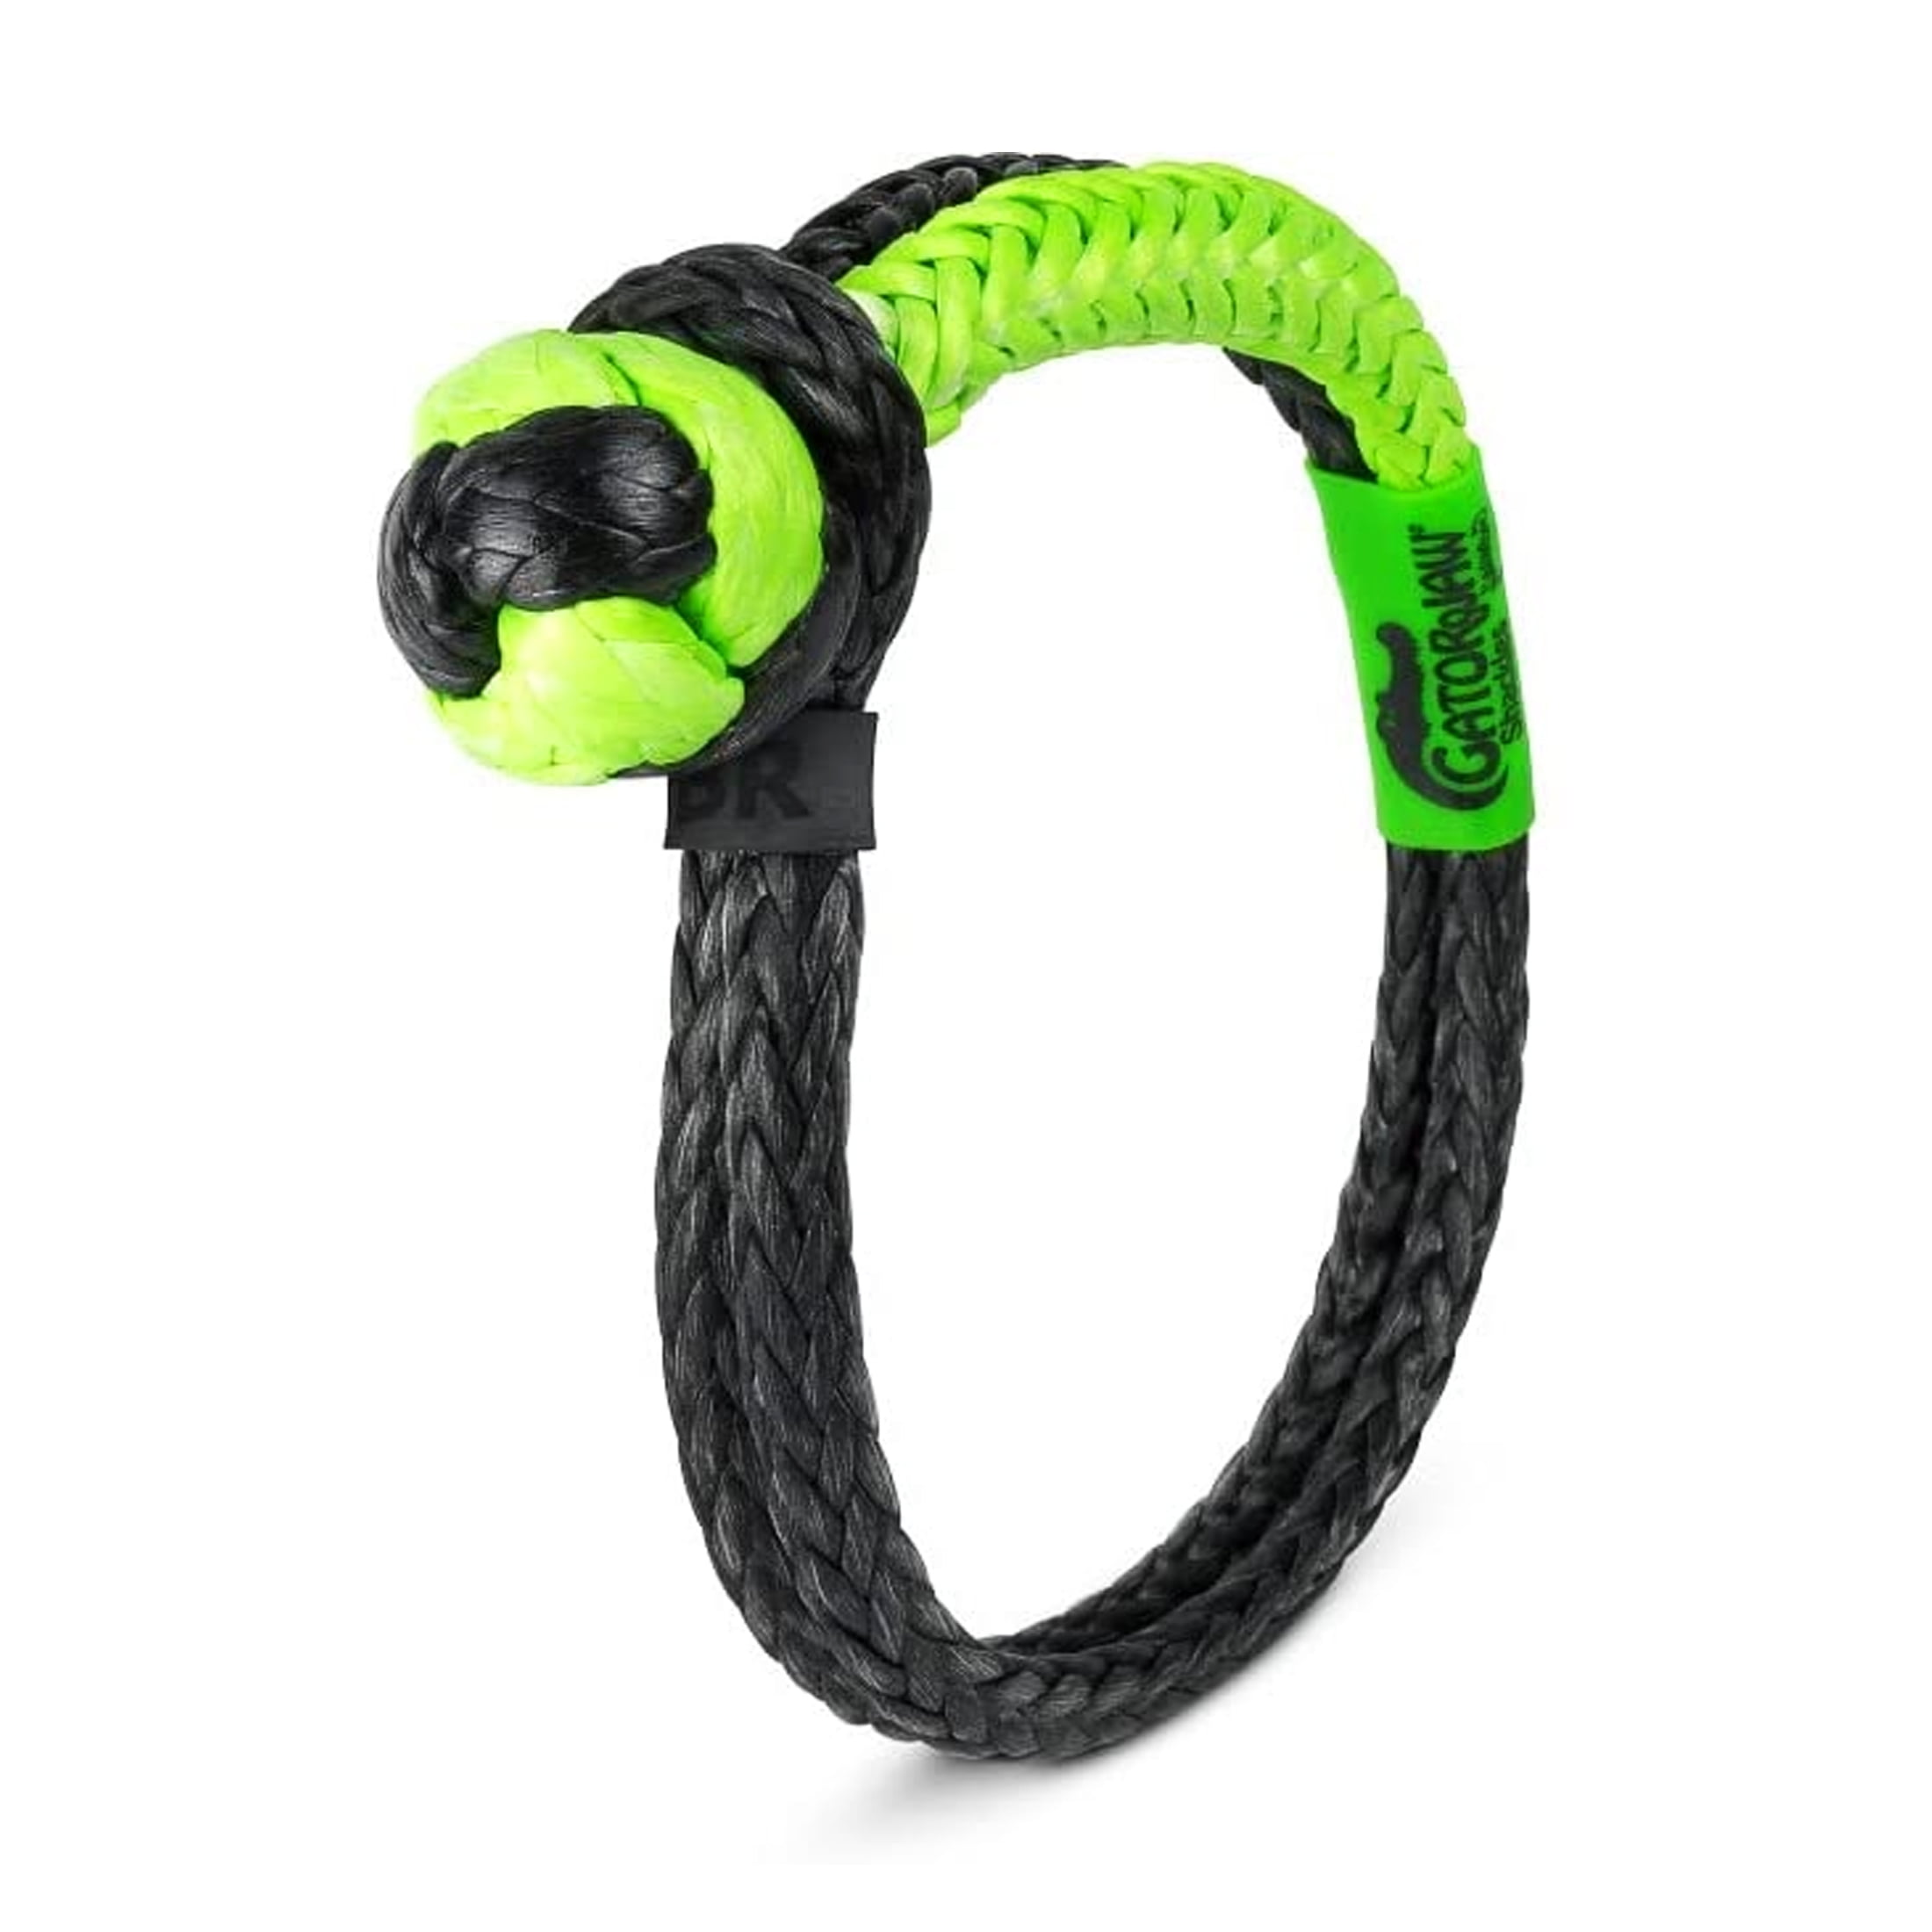 Made in The USA Bubba Rope Gator-Jaw Pro Synthetic Soft Shackle 47,000LB Breaking Strength 3/8” NexGen Green & Black 